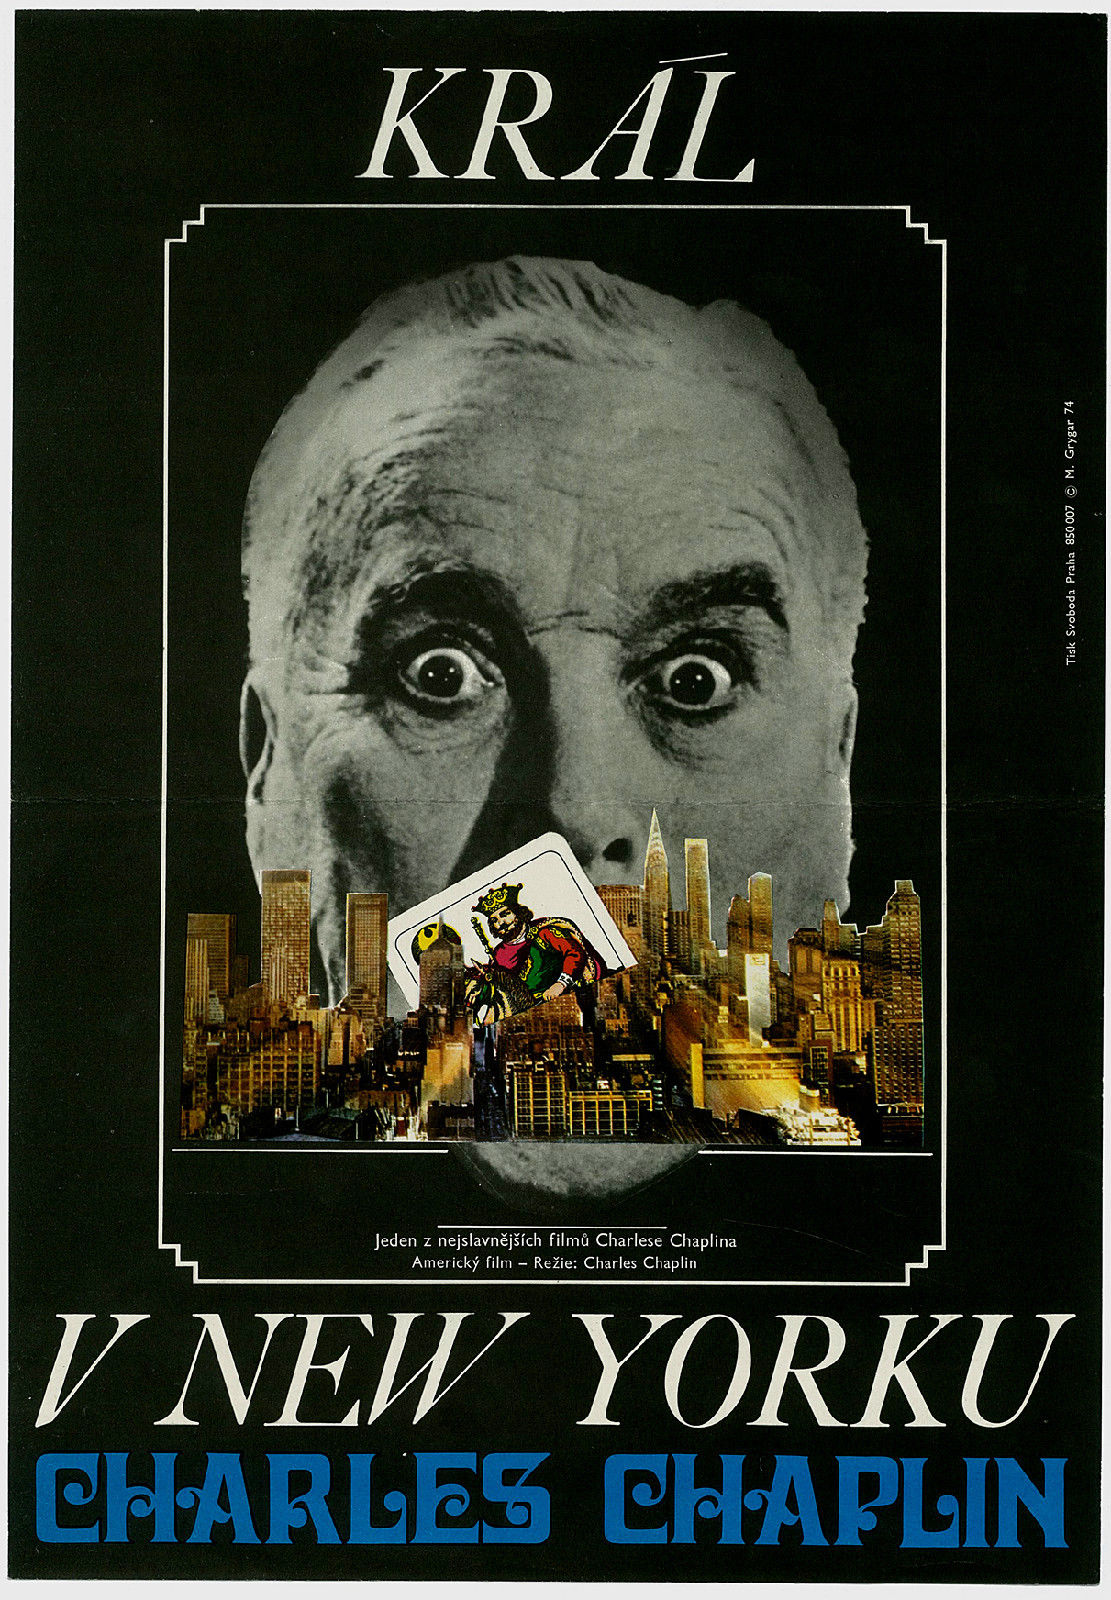 Rare Czech movie poster for King in New York Charlie Chaplin